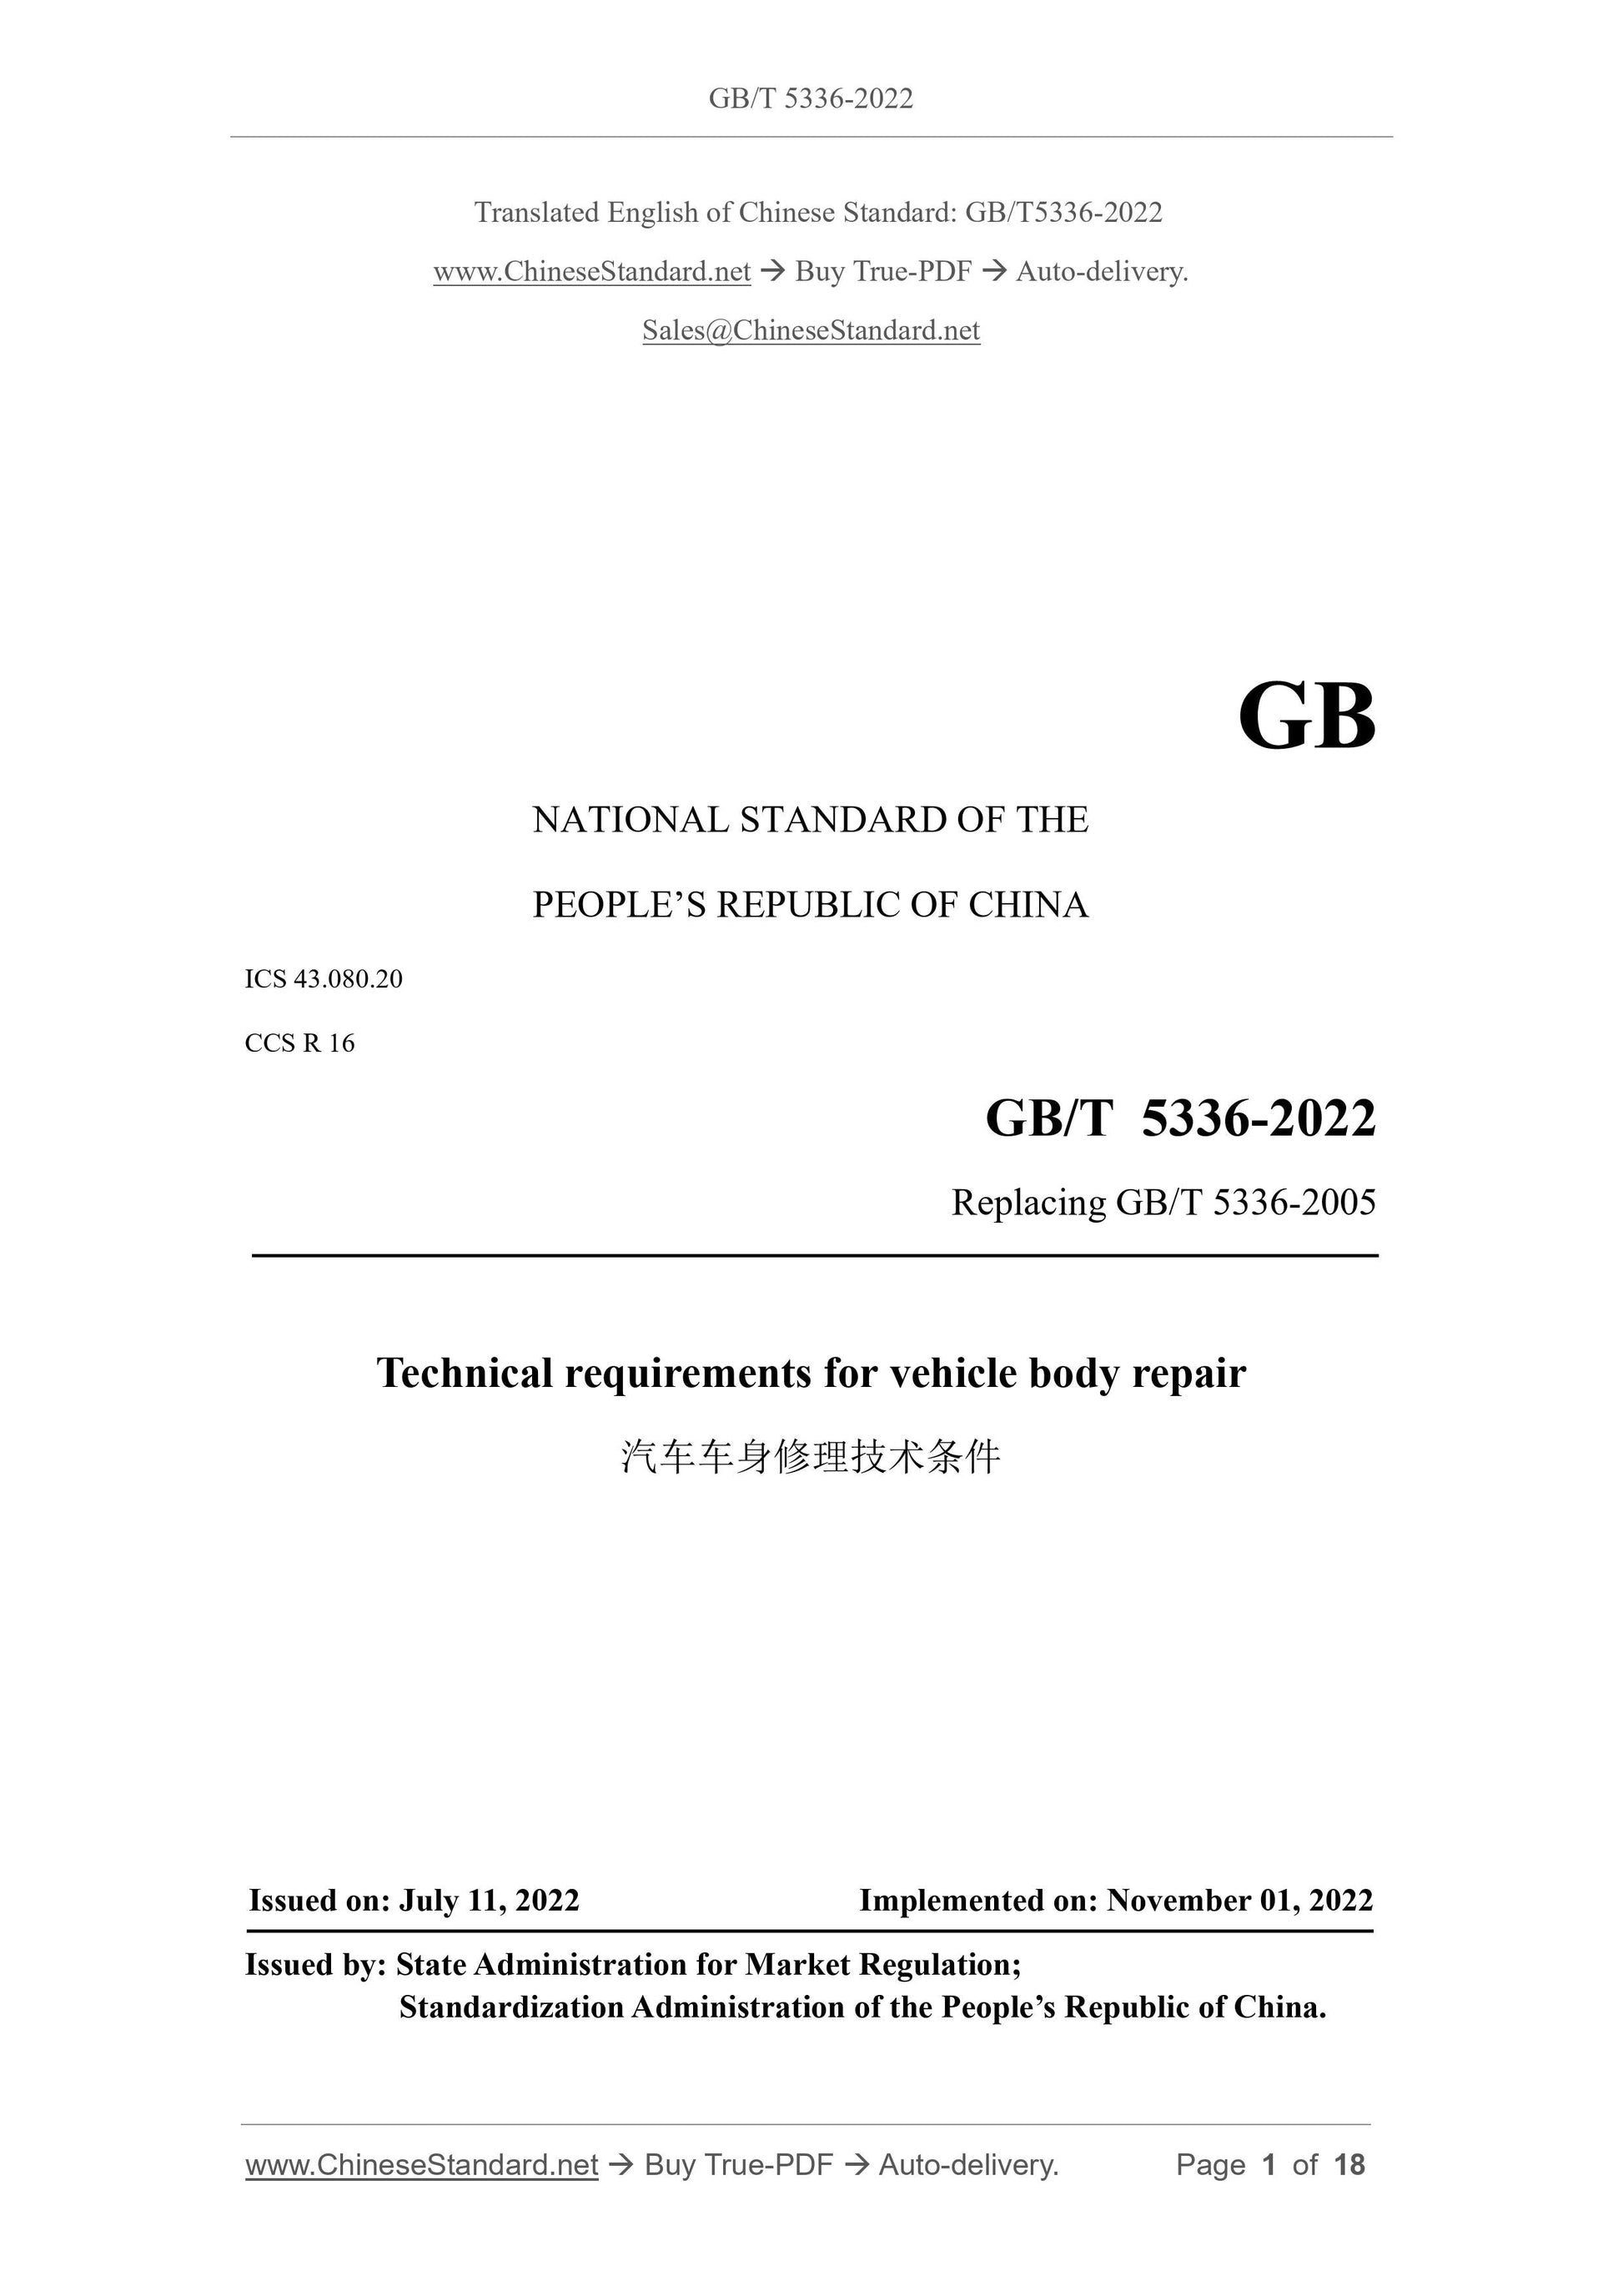 GB/T 5336-2022 Page 1